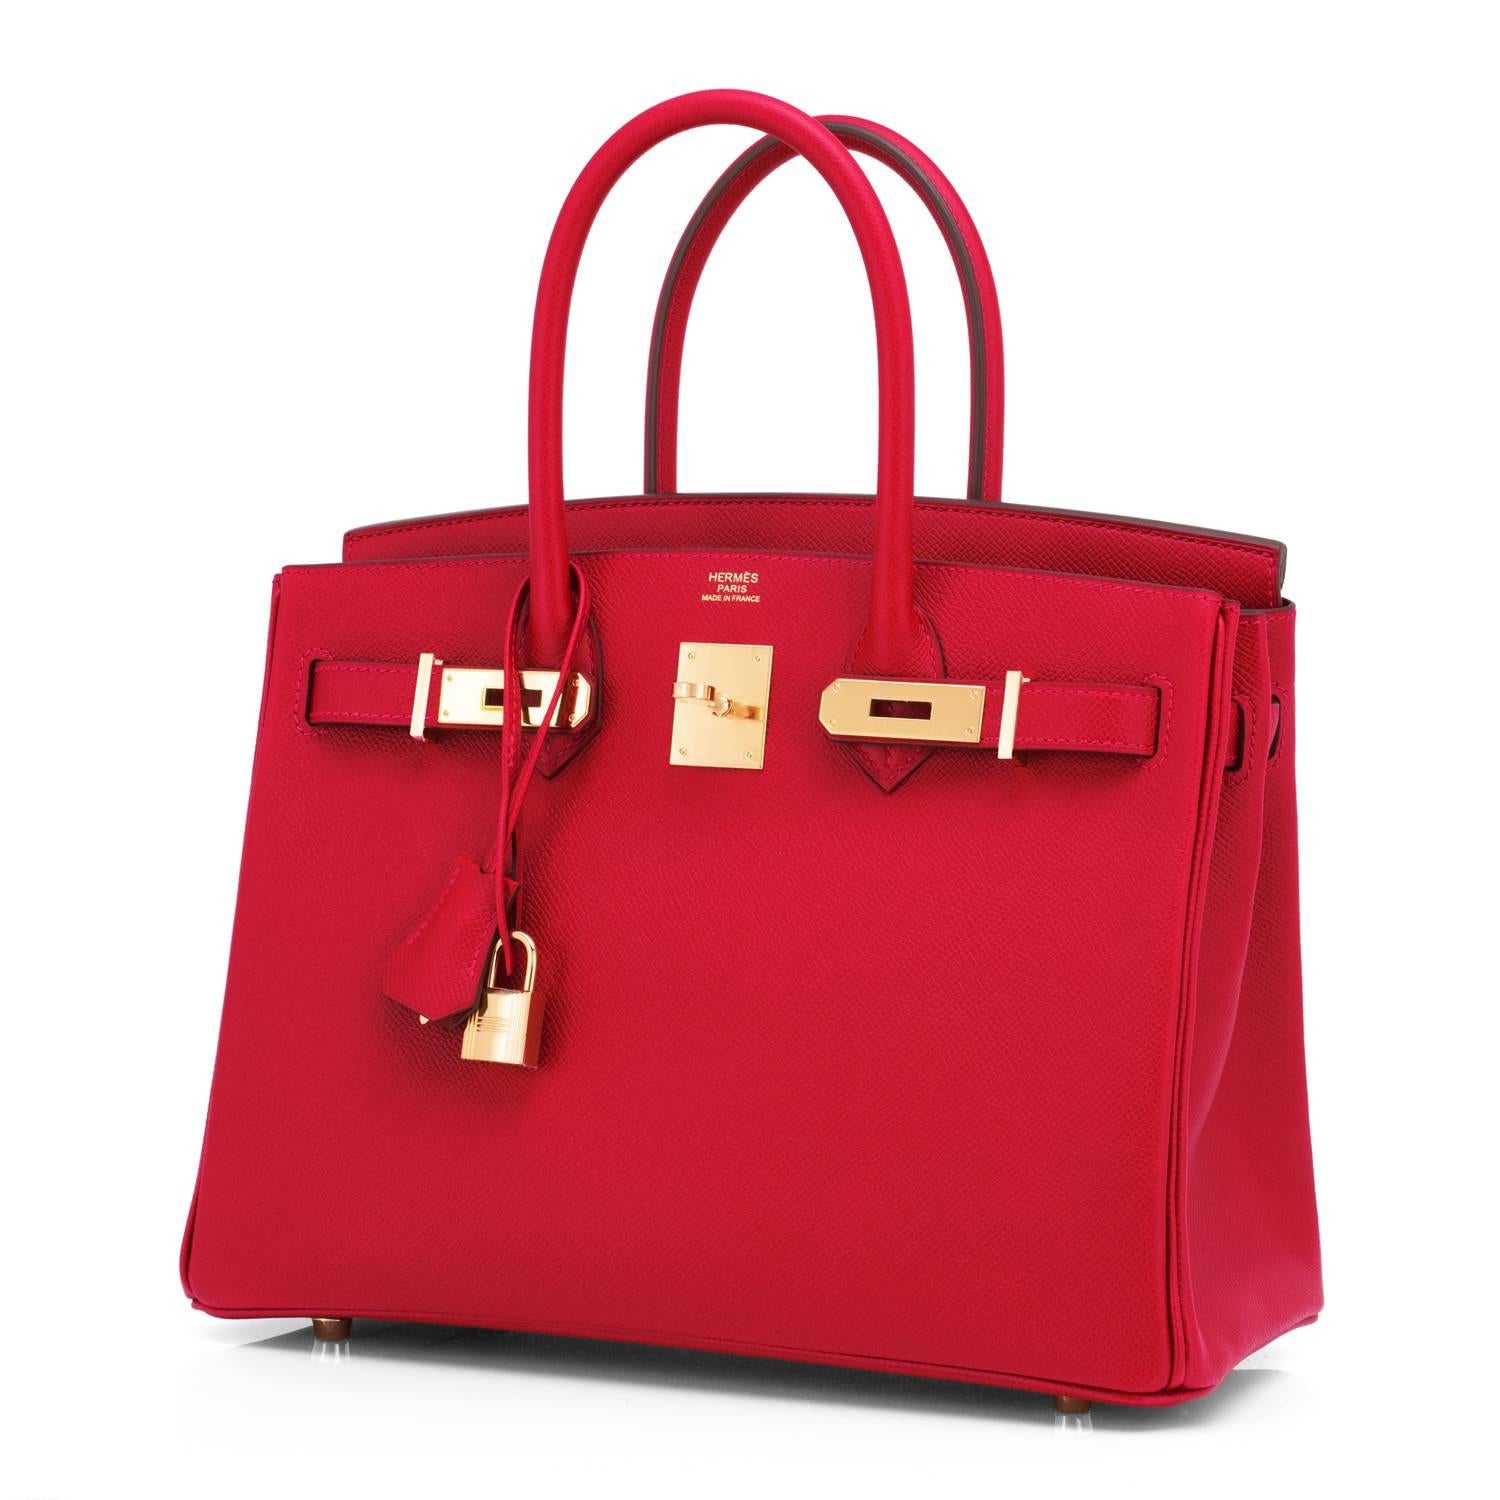 Hermes Rouge Casaque 30cm Birkin Red Epsom Gold Hardware Gorgeous Rare to find store fresh Rouge Casaque Birkin 30. 
Brand New in Box. Store fresh. Pristine condition (with plastic on hardware).
Perfect gift! Coming full set with keys, lock,